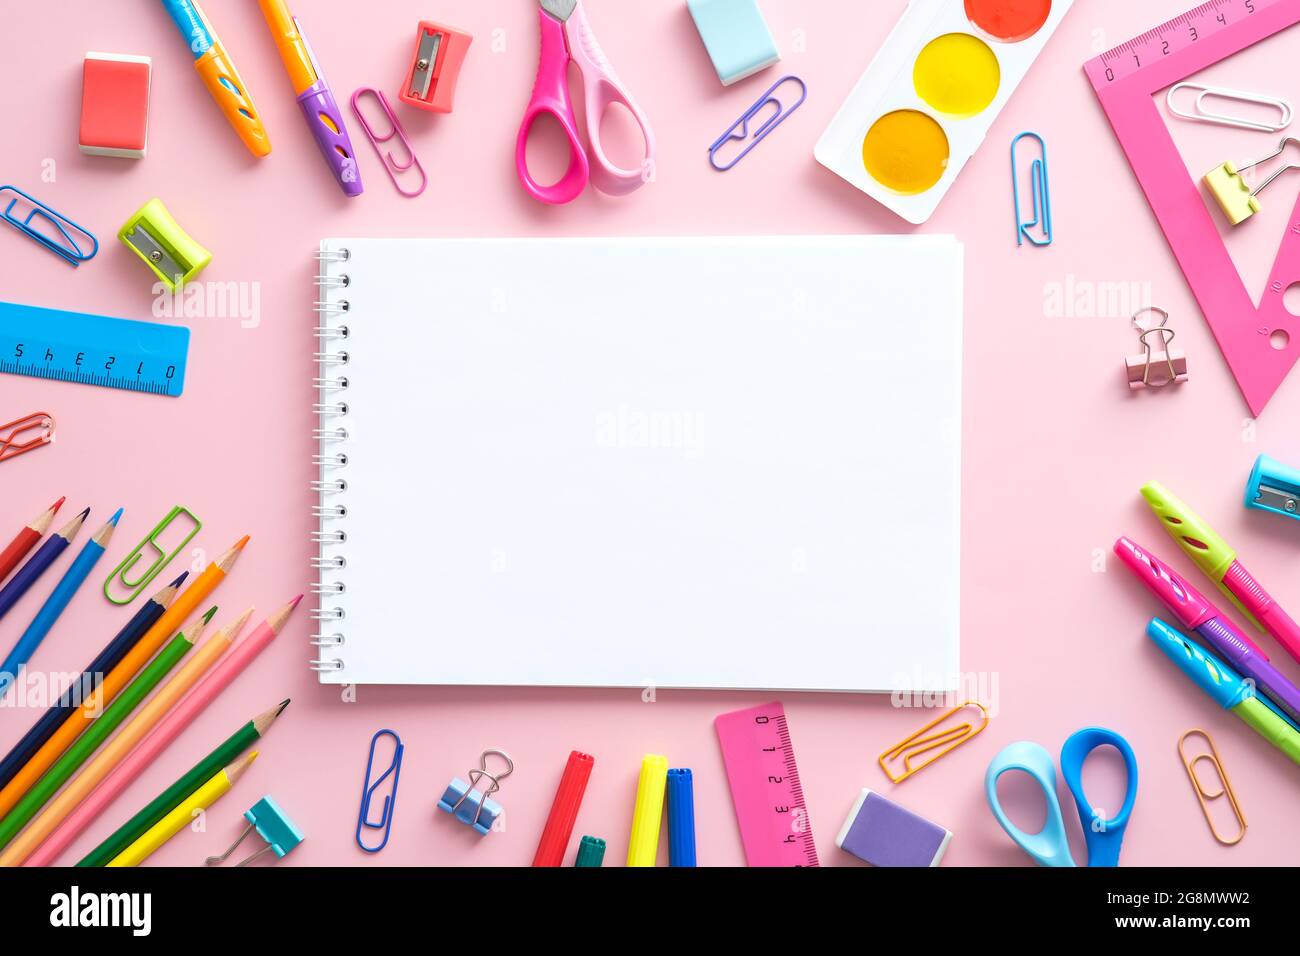 Premium Photo  School supplies in pink colors on a white background with a  place for an inscription preparation for school